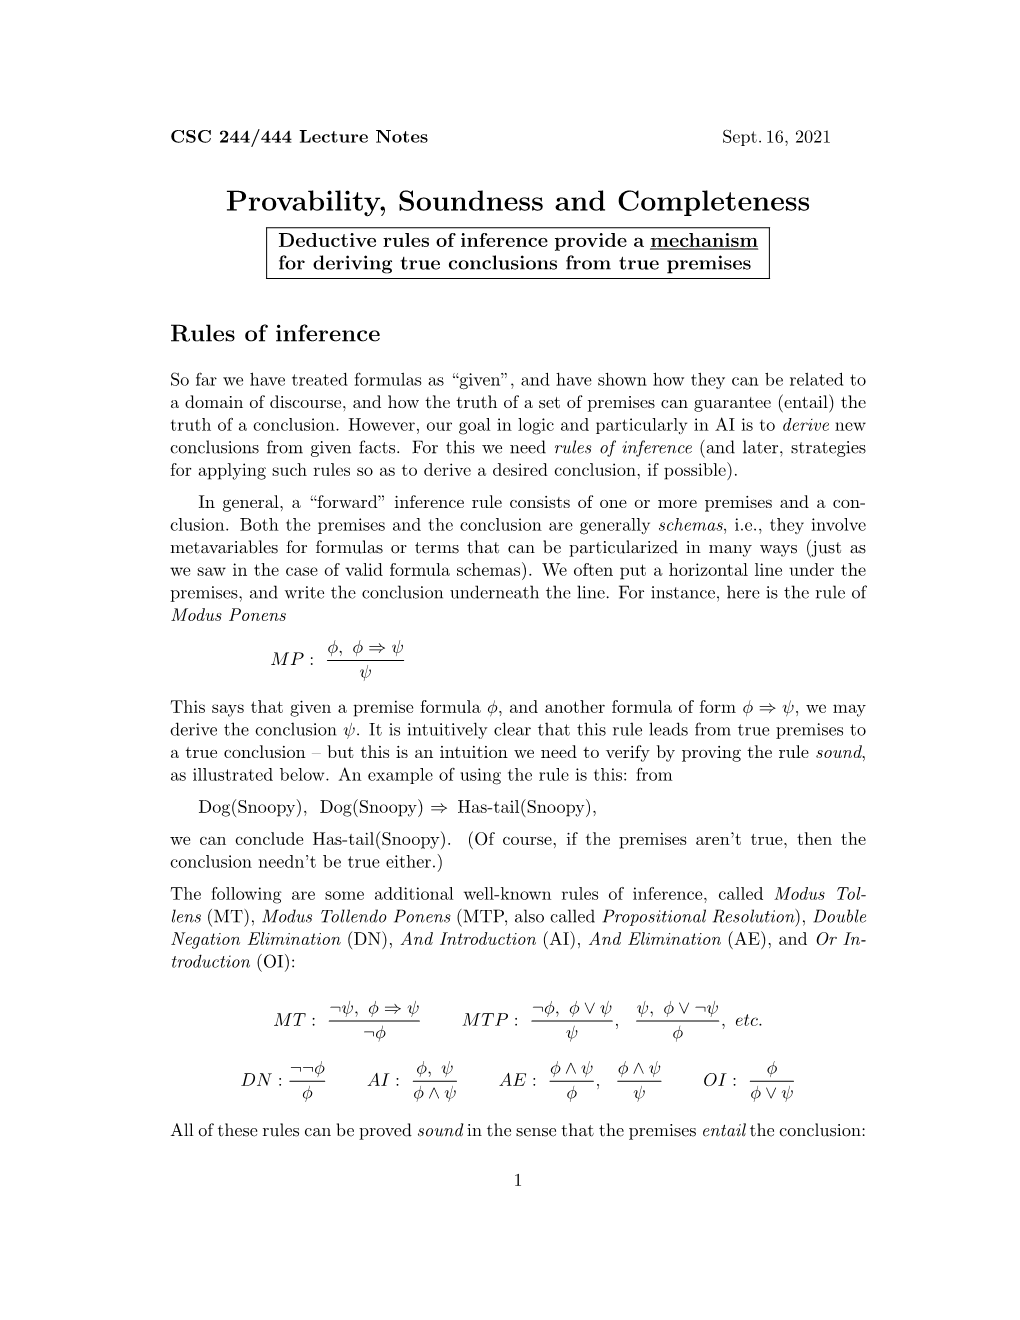 Provability, Soundness and Completeness Deductive Rules of Inference Provide a Mechanism for Deriving True Conclusions from True Premises